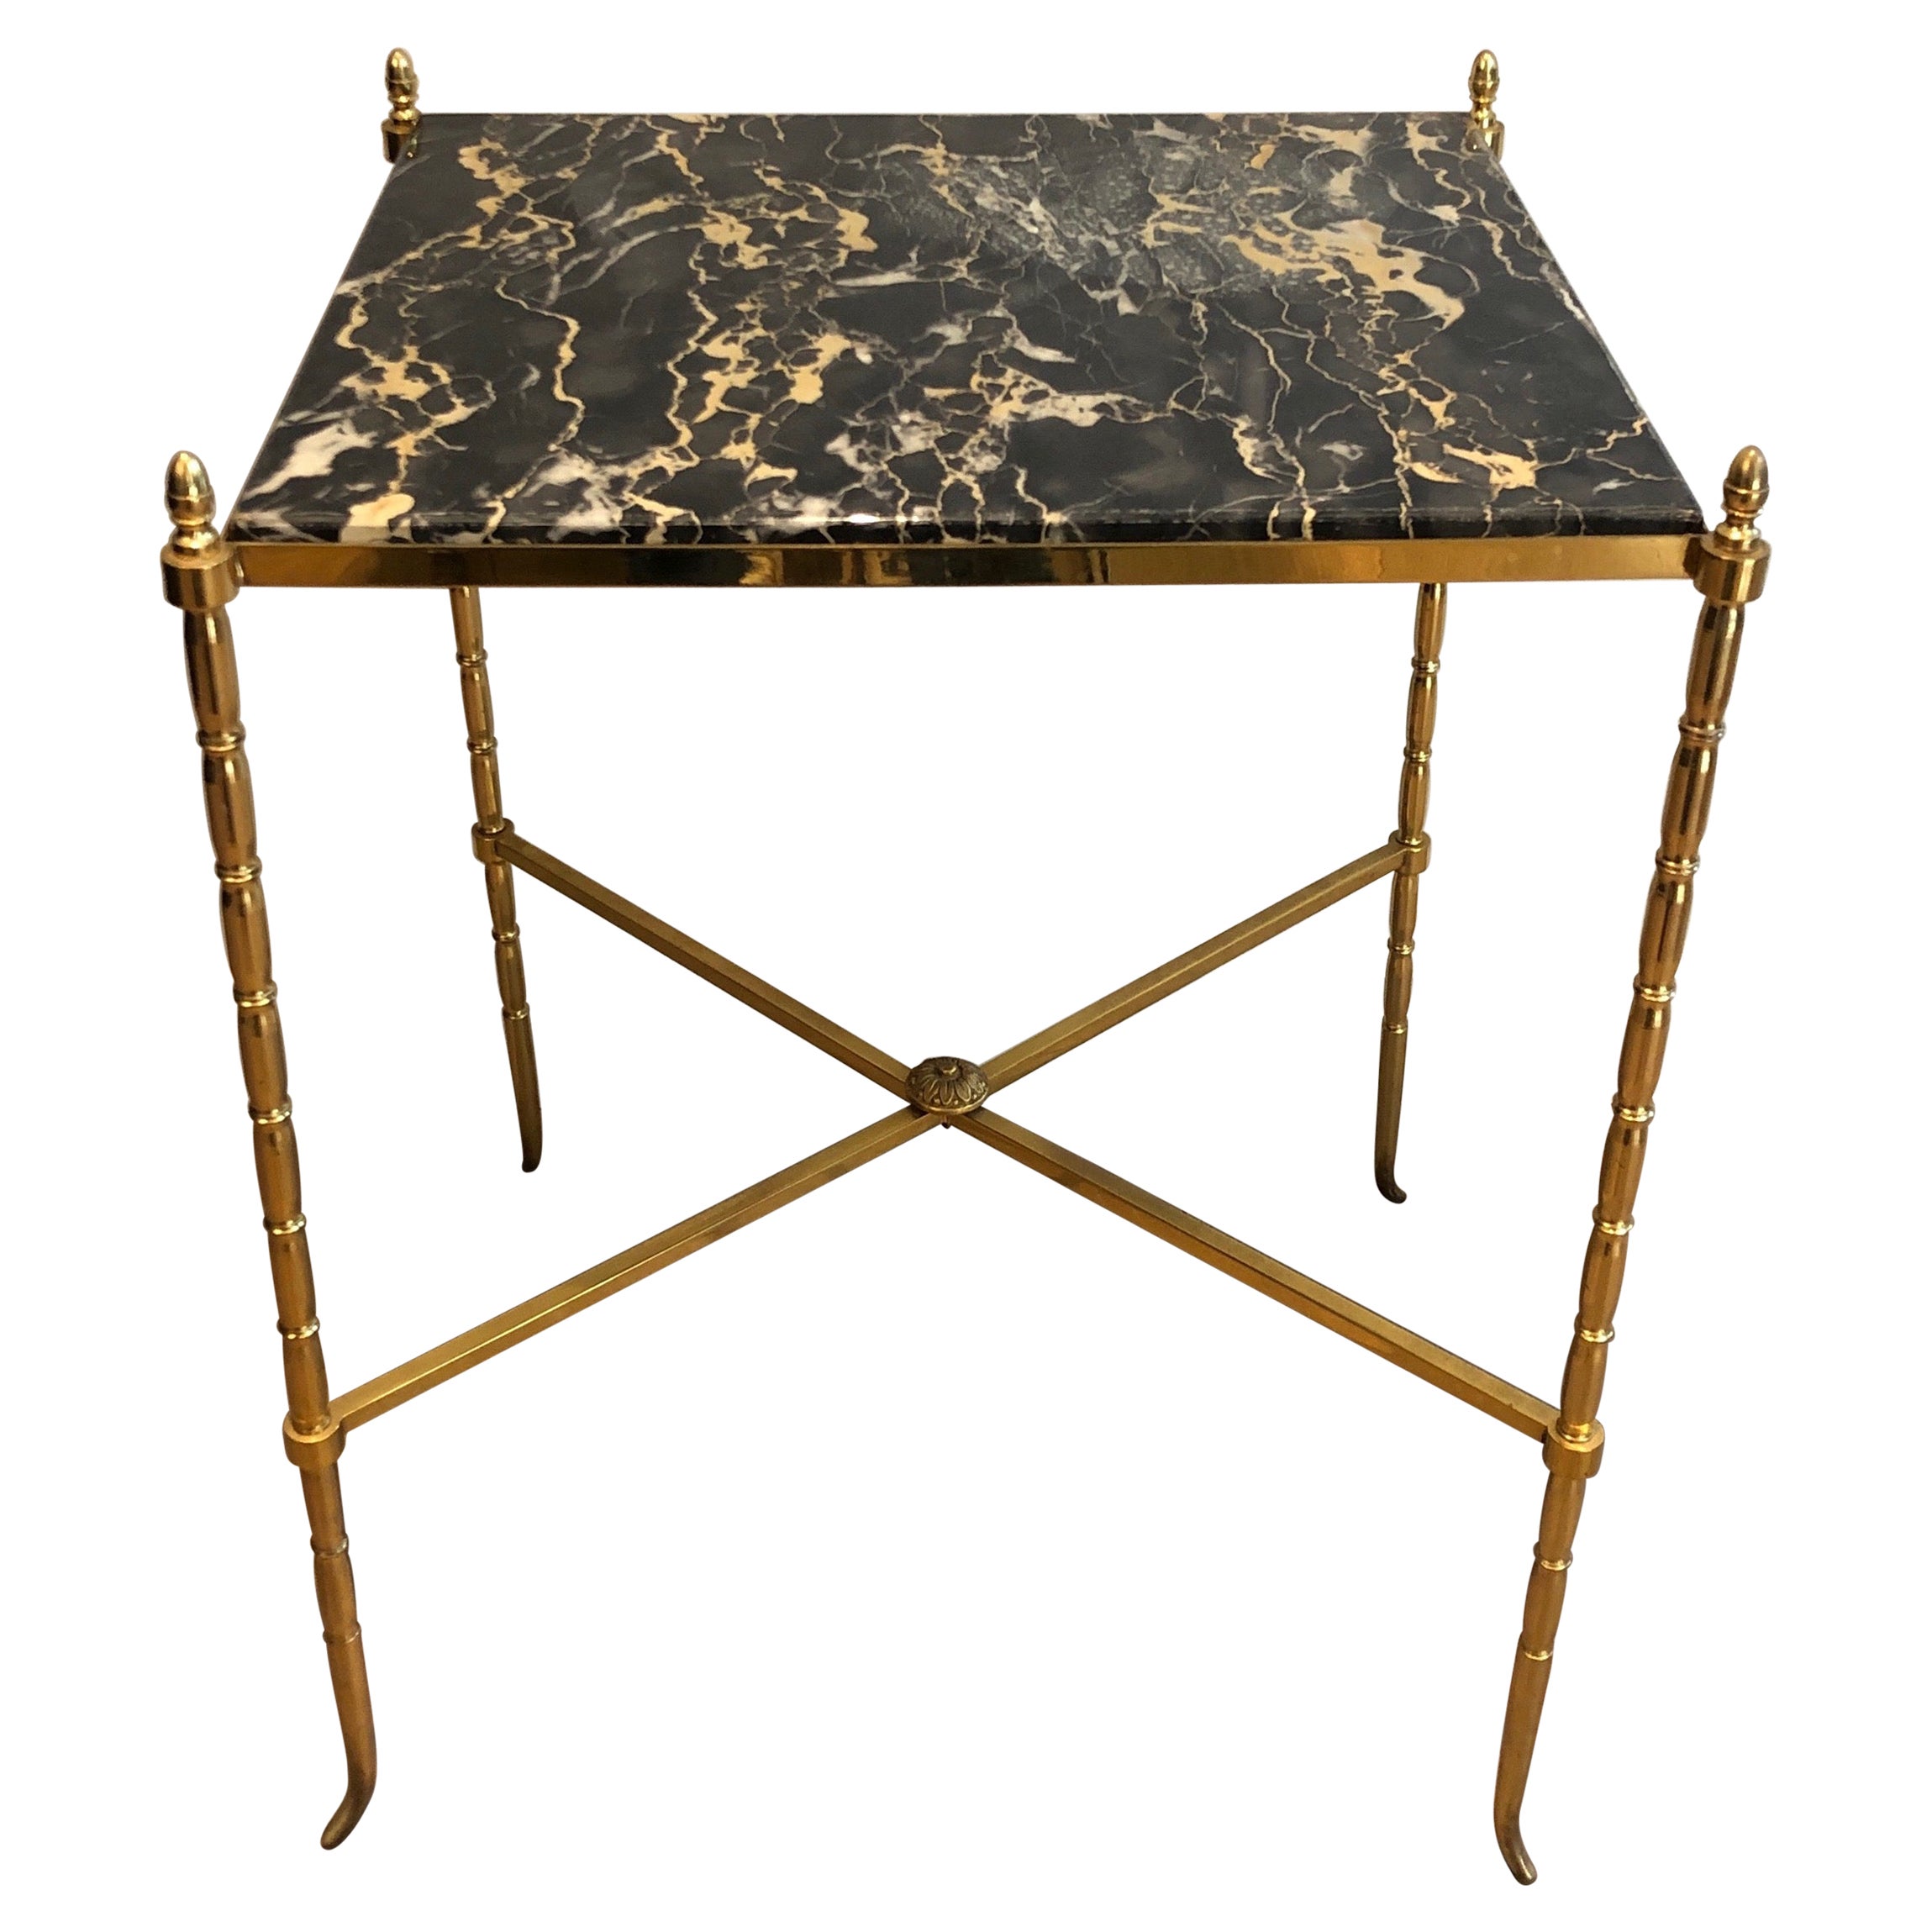 Brass Side Table with Black Marble, French Work by Maison Baguès, circa 1940